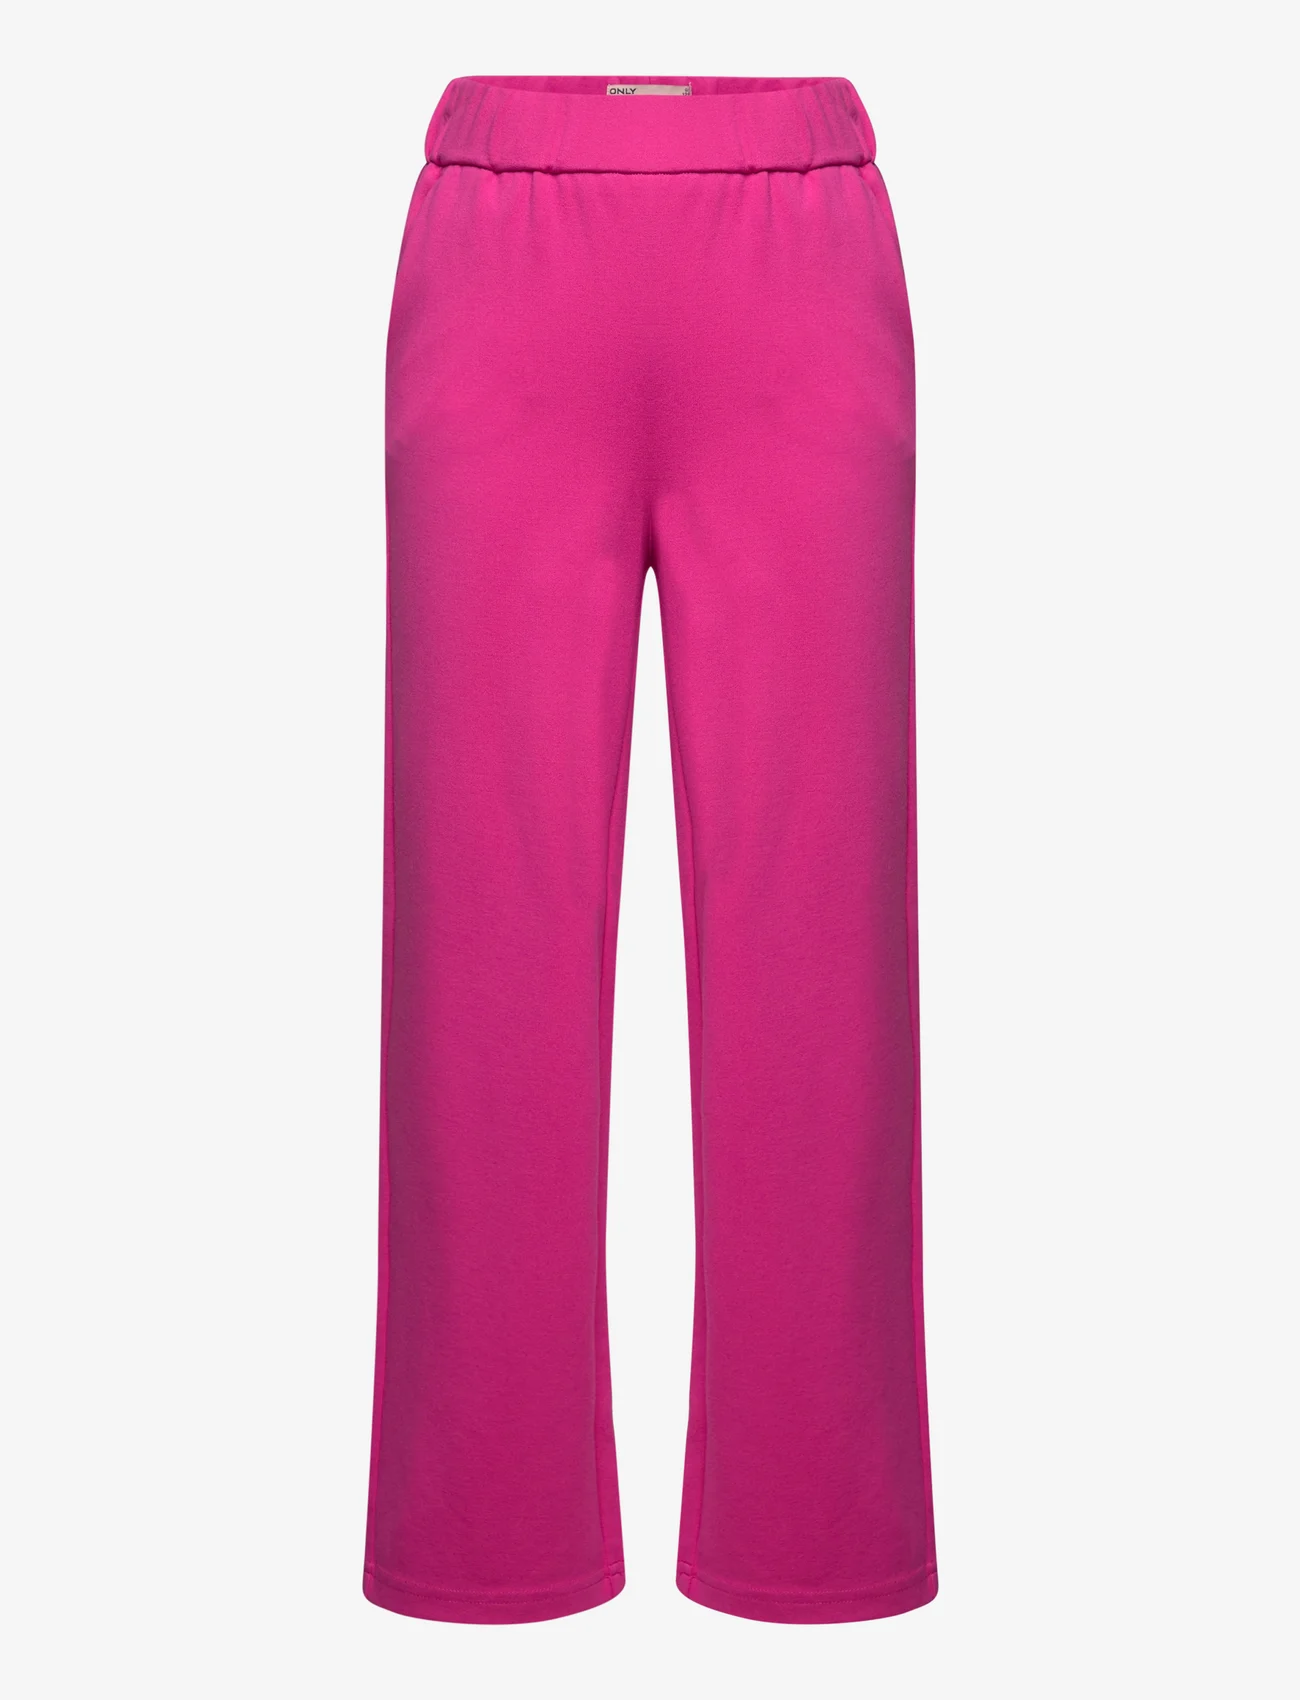 Kids Only - KOGPOPTRASH LIFE WIDE PANT PNT - lowest prices - raspberry rose - 0